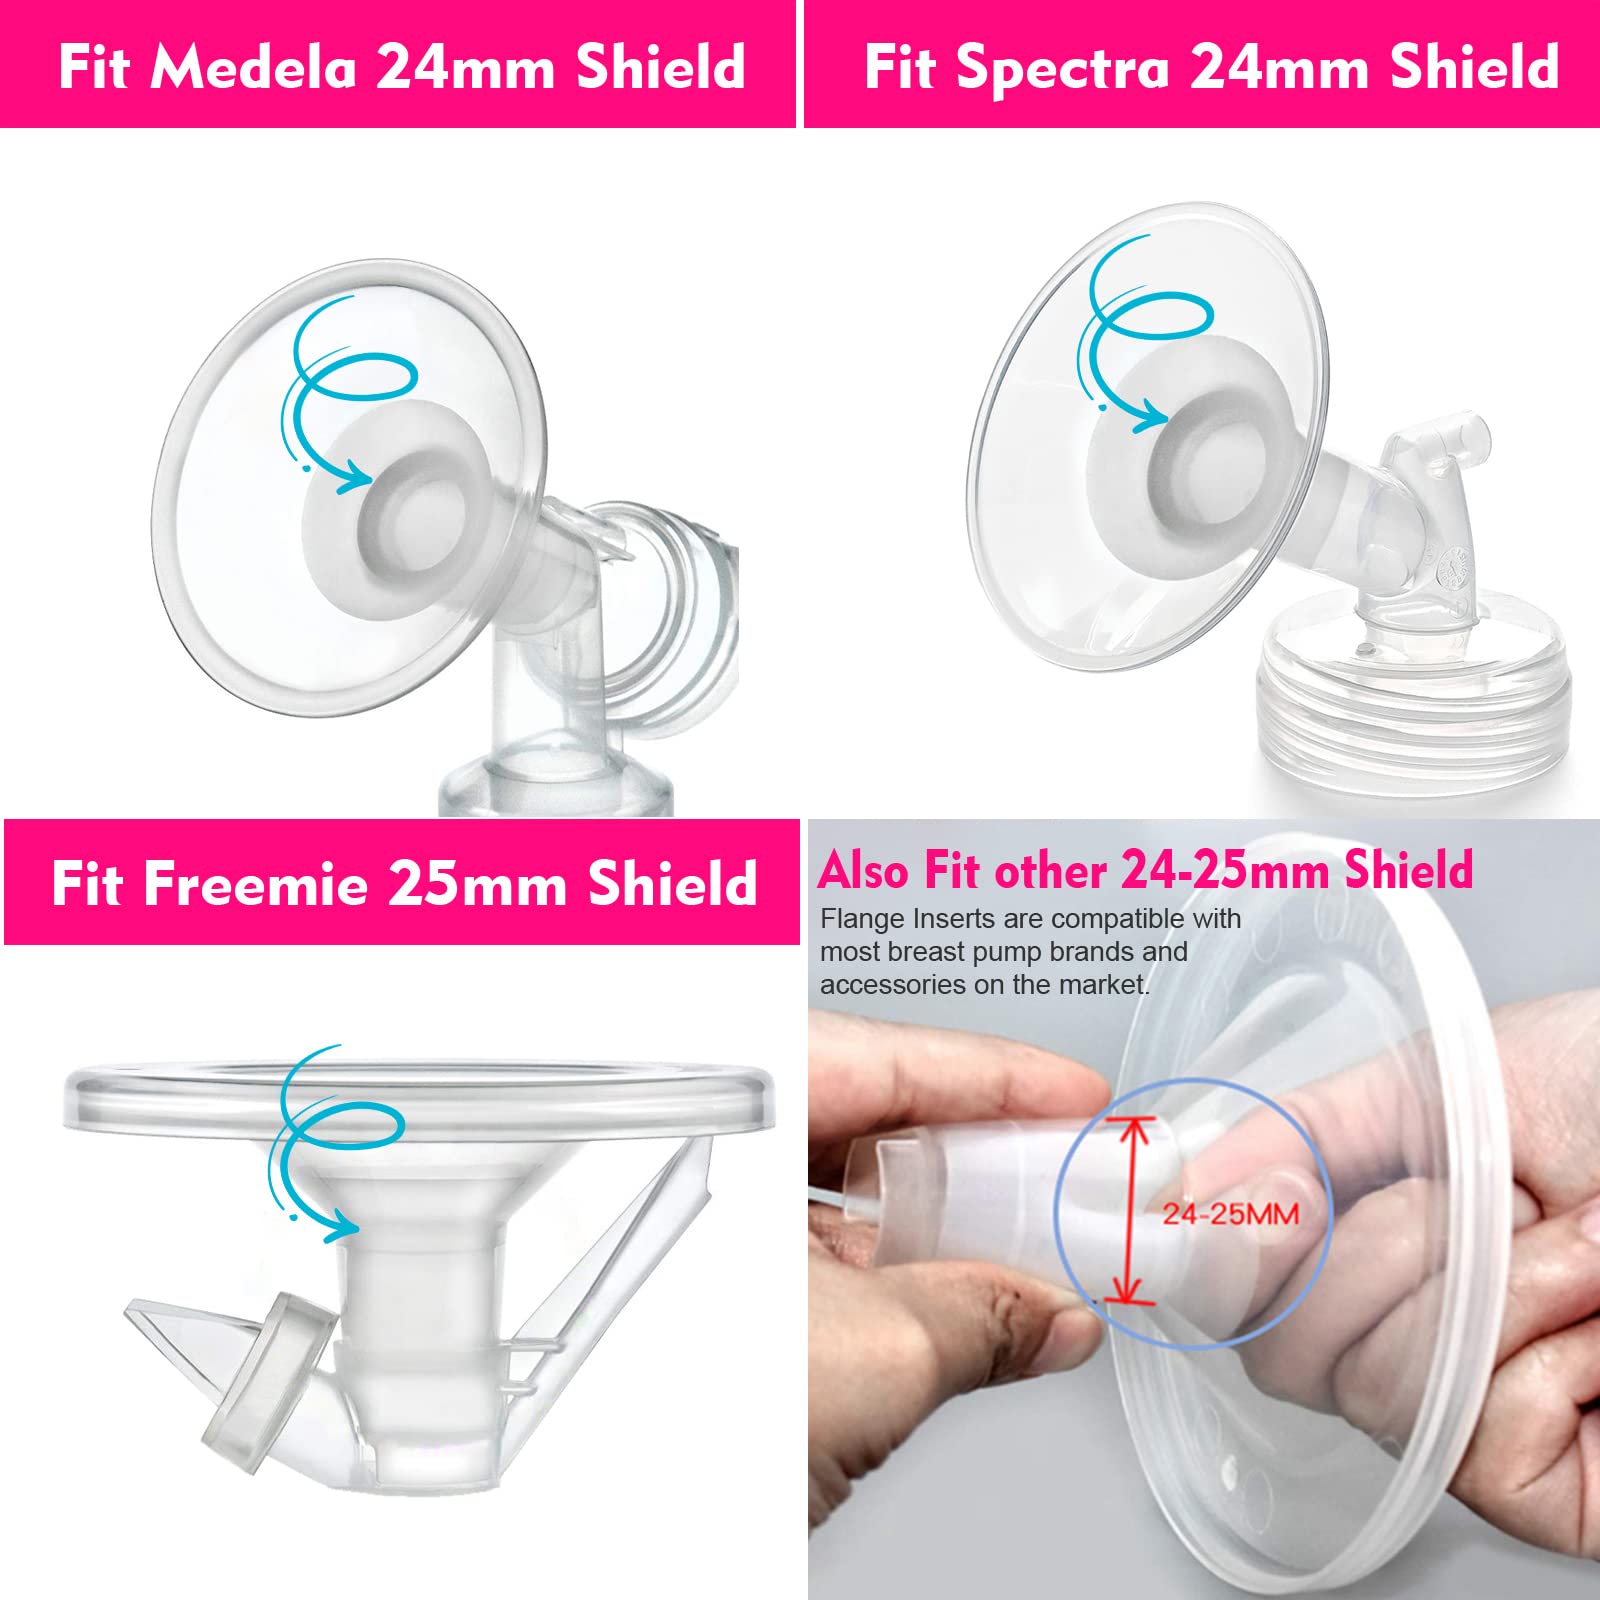 Durceler 22mm Silicone Flange Inserts Compatible with Medela / for Spectra S1 S2 / Rainyb / Willow go/ Momcozy S12/ TSRETE 24mm Breast Pump Shields or Freemie 25mm; Reduce Nipple Tunnel Down to 22mm